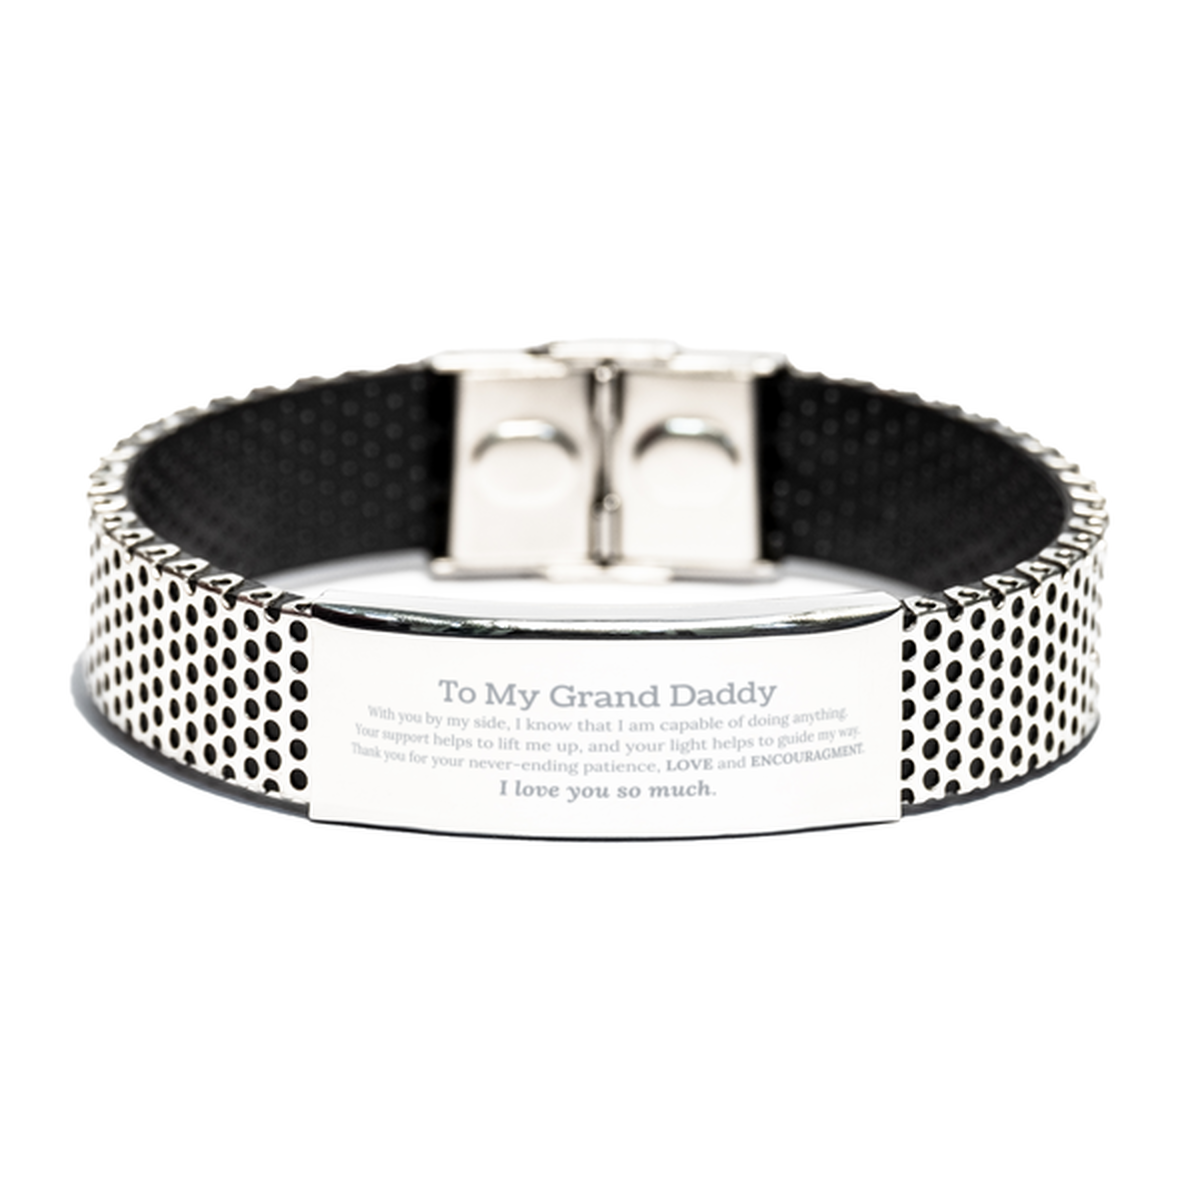 Appreciation Grand Daddy Stainless Steel Bracelet Gifts, To My Grand Daddy Birthday Christmas Wedding Keepsake Gifts for Grand Daddy With you by my side, I know that I am capable of doing anything. I love you so much